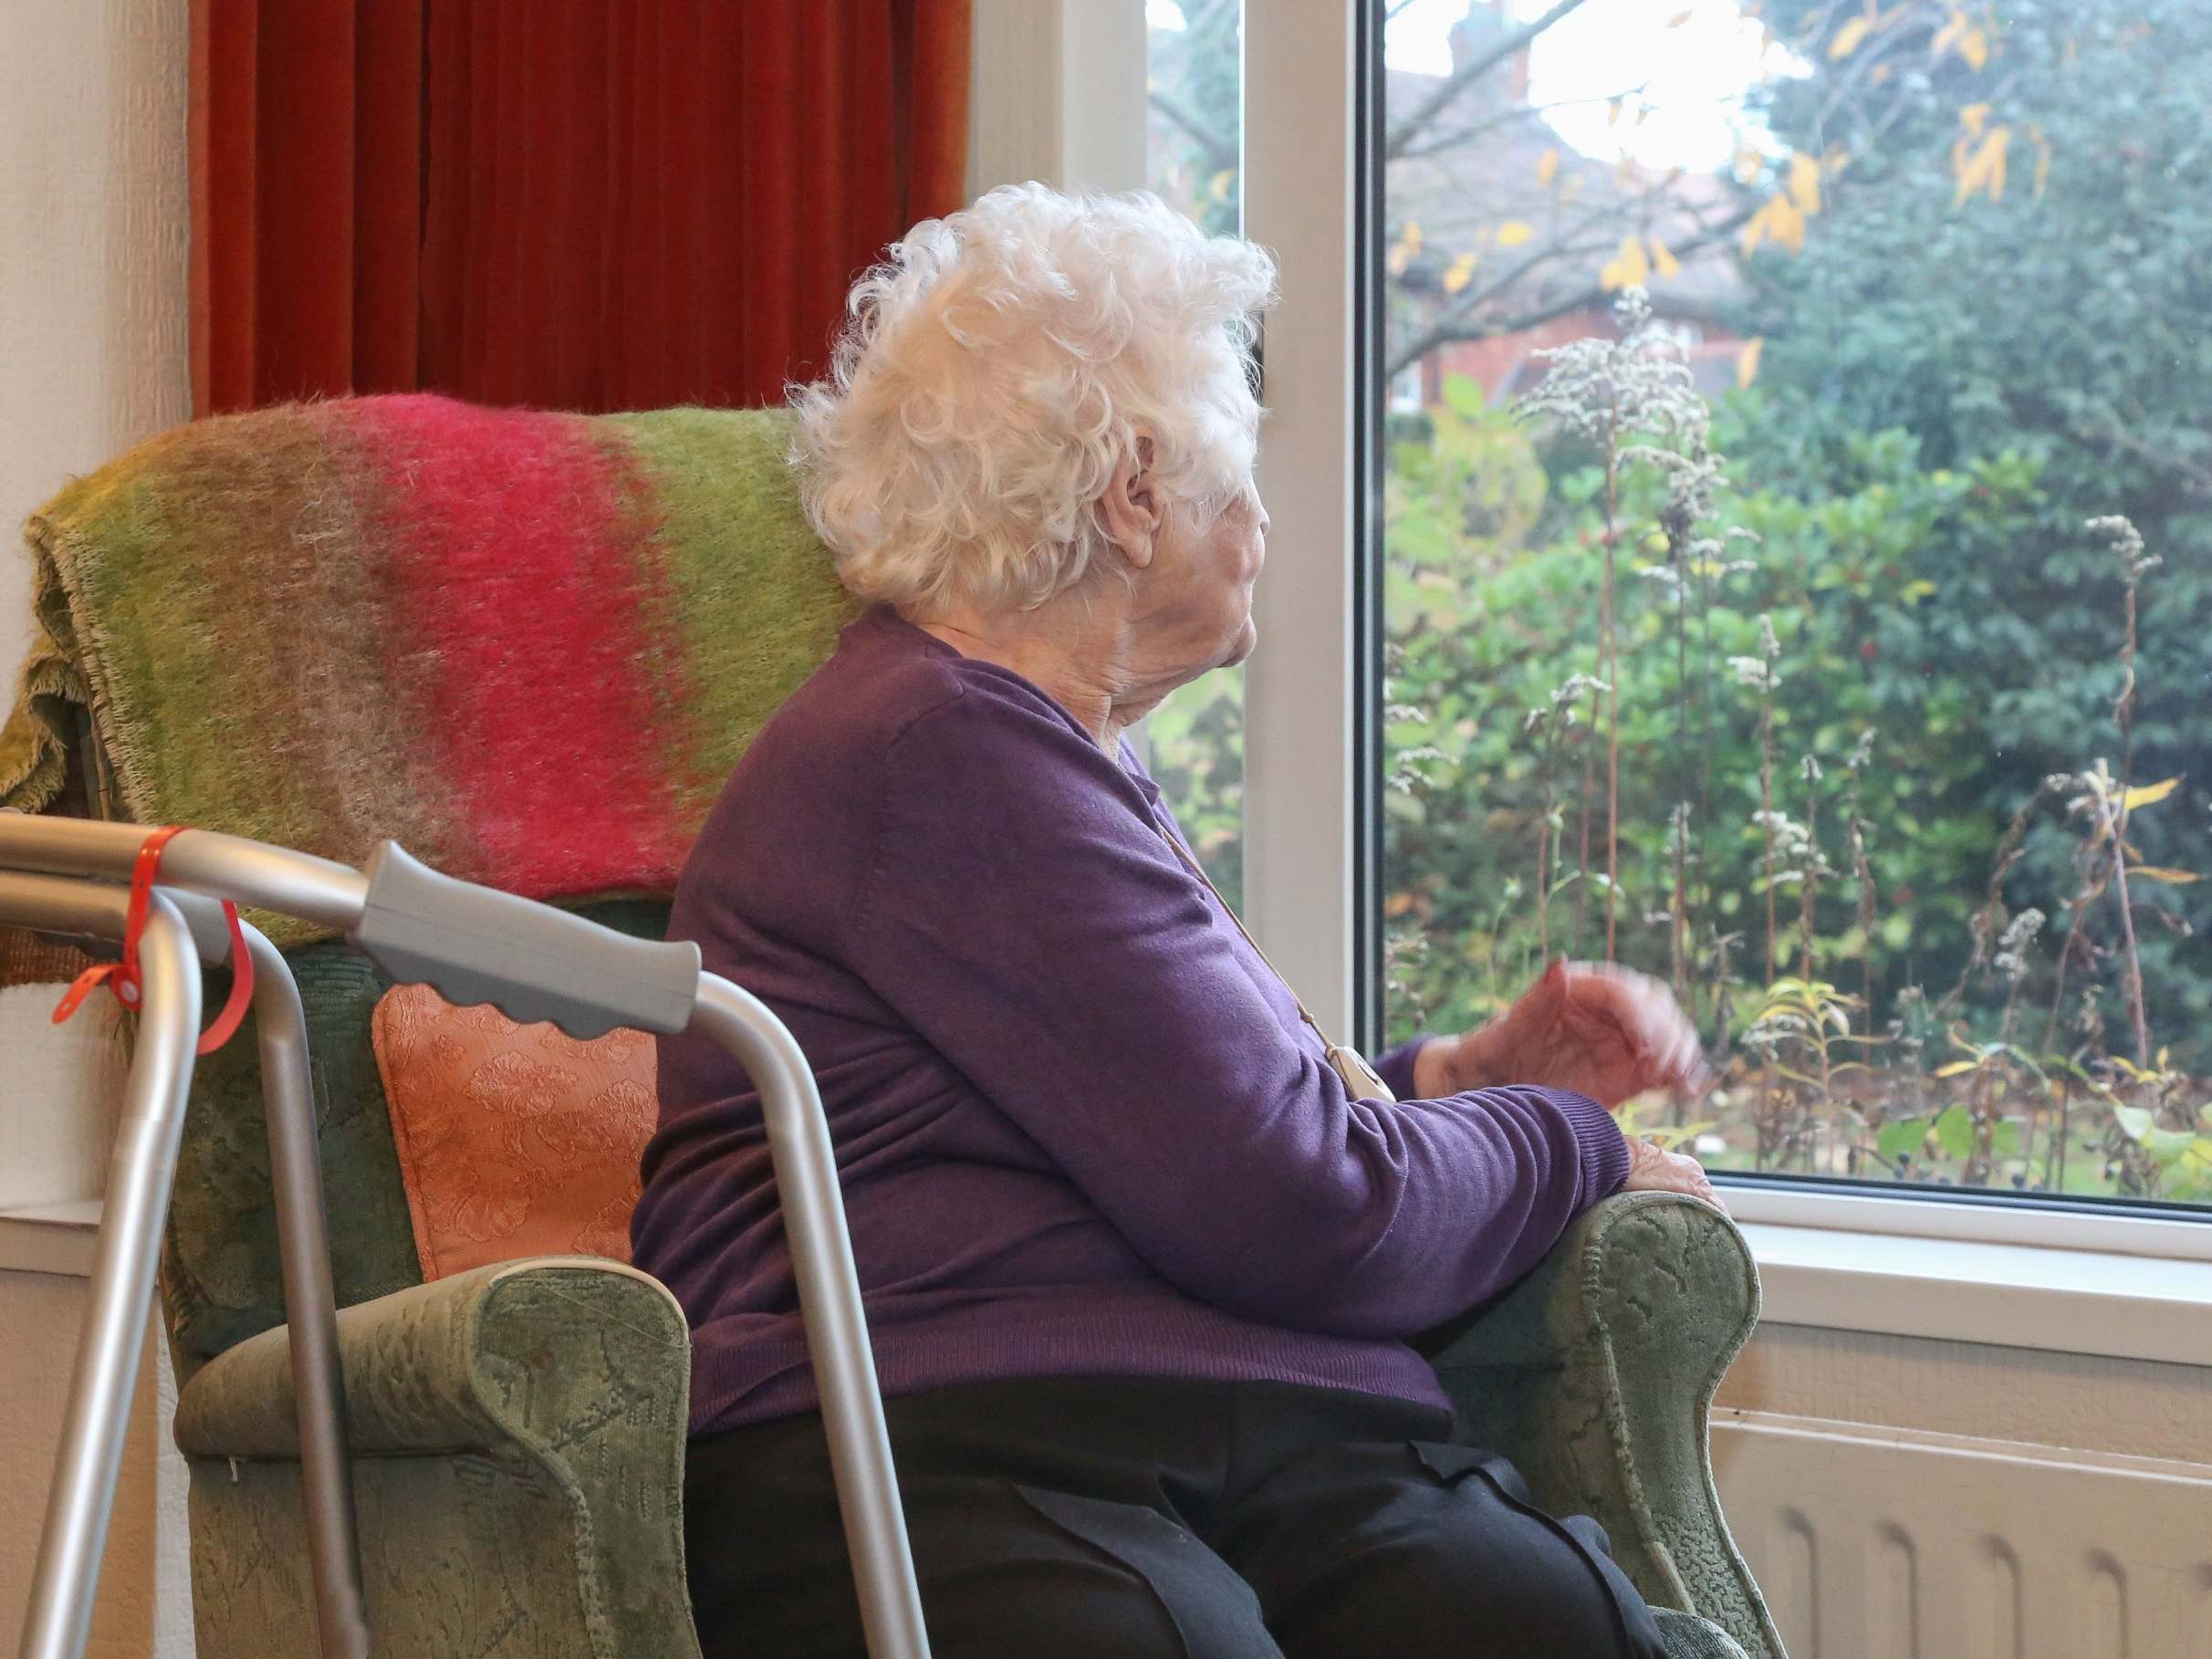 There are 1.4 million elderly people in England who are chronically lonely.